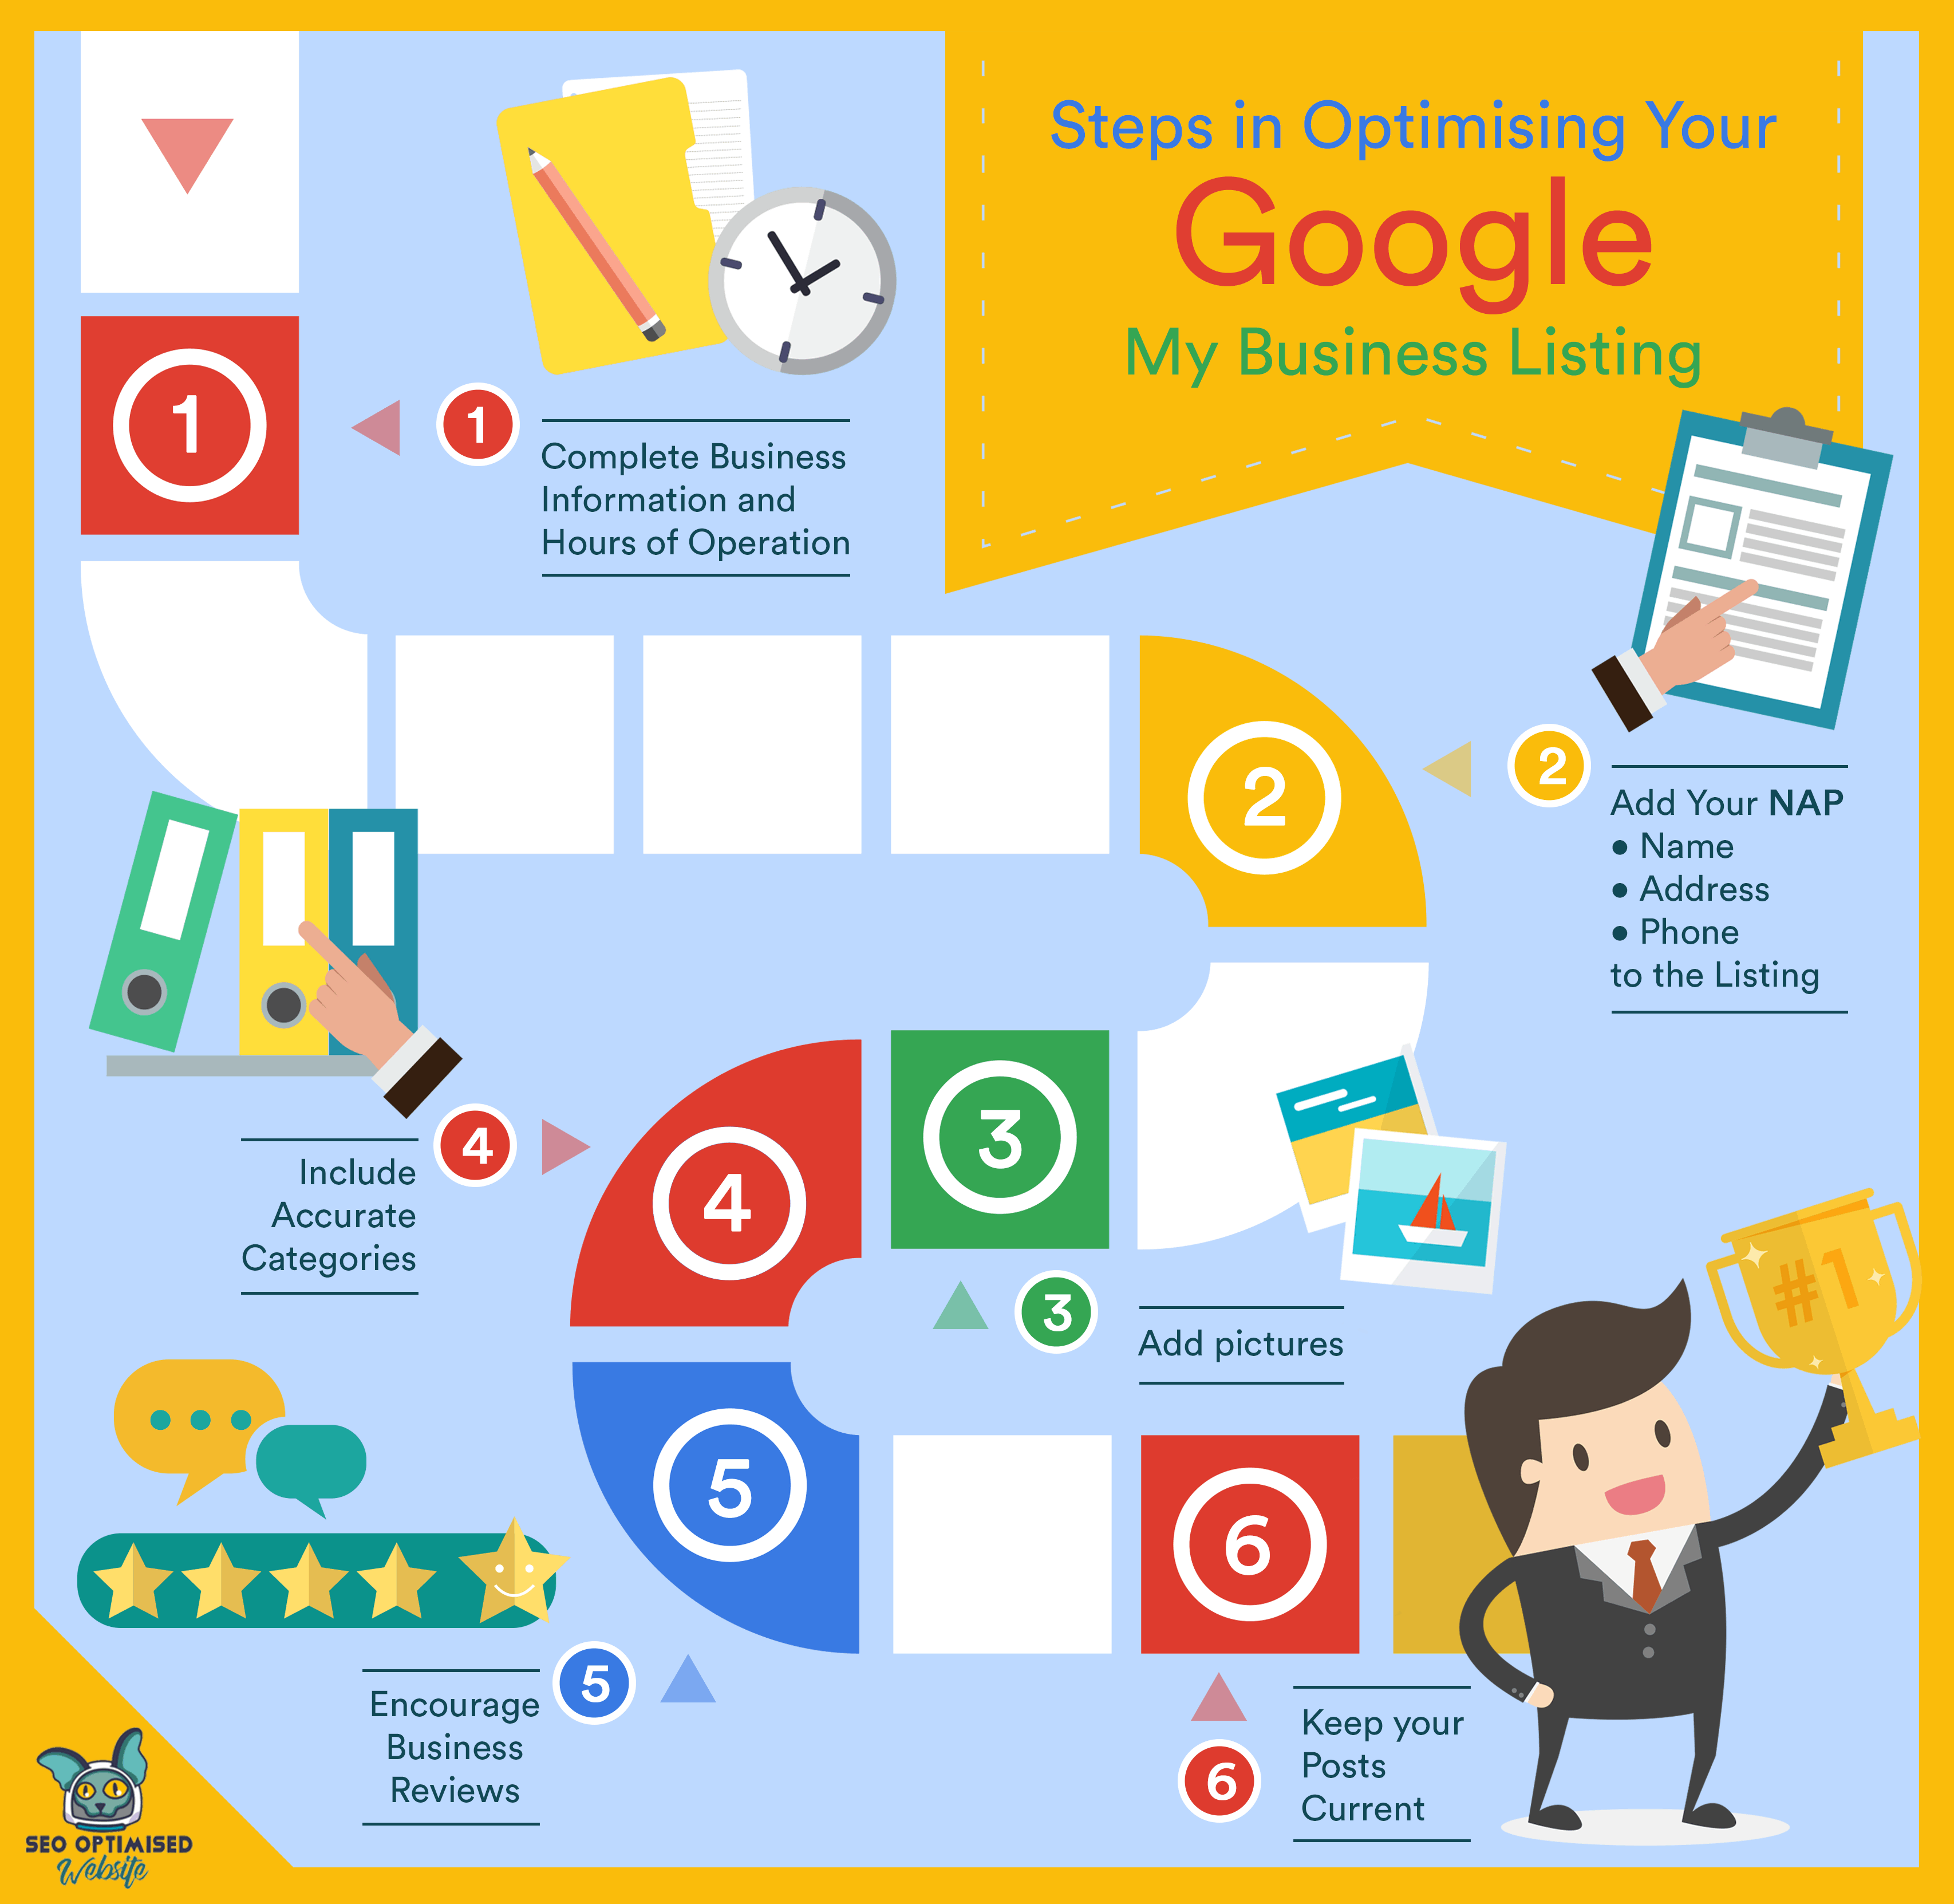 Steps in Optimising Your Google My Business Listing Infographic